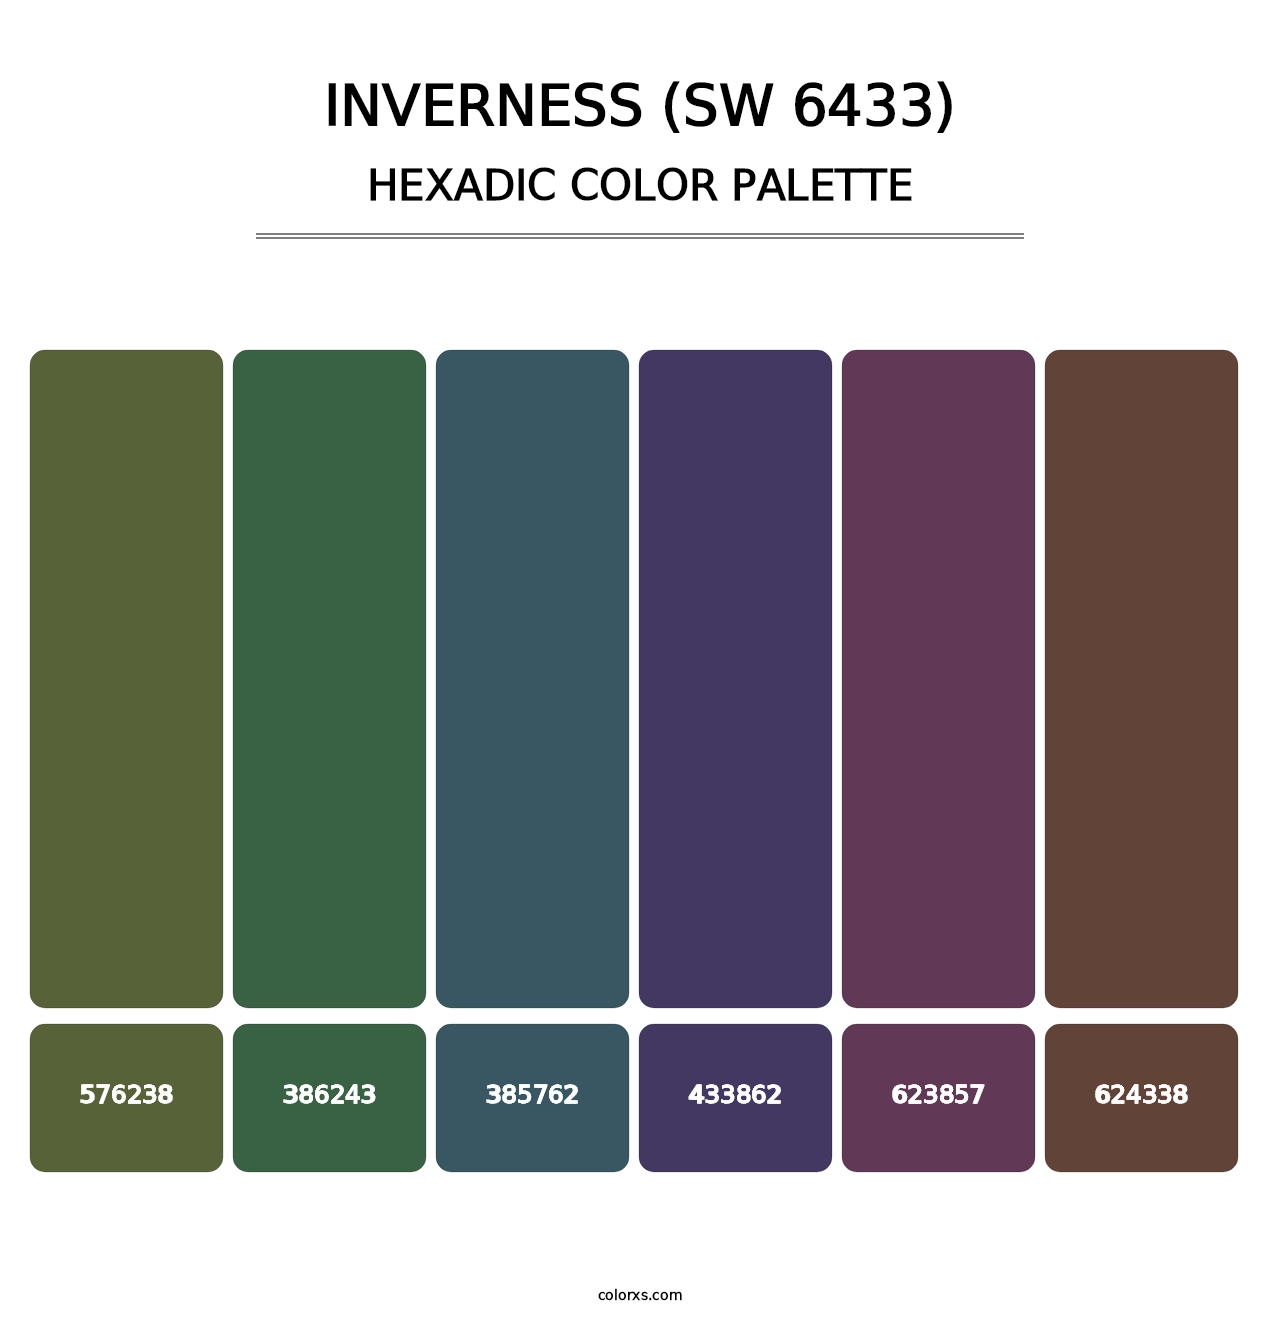 Inverness (SW 6433) - Hexadic Color Palette